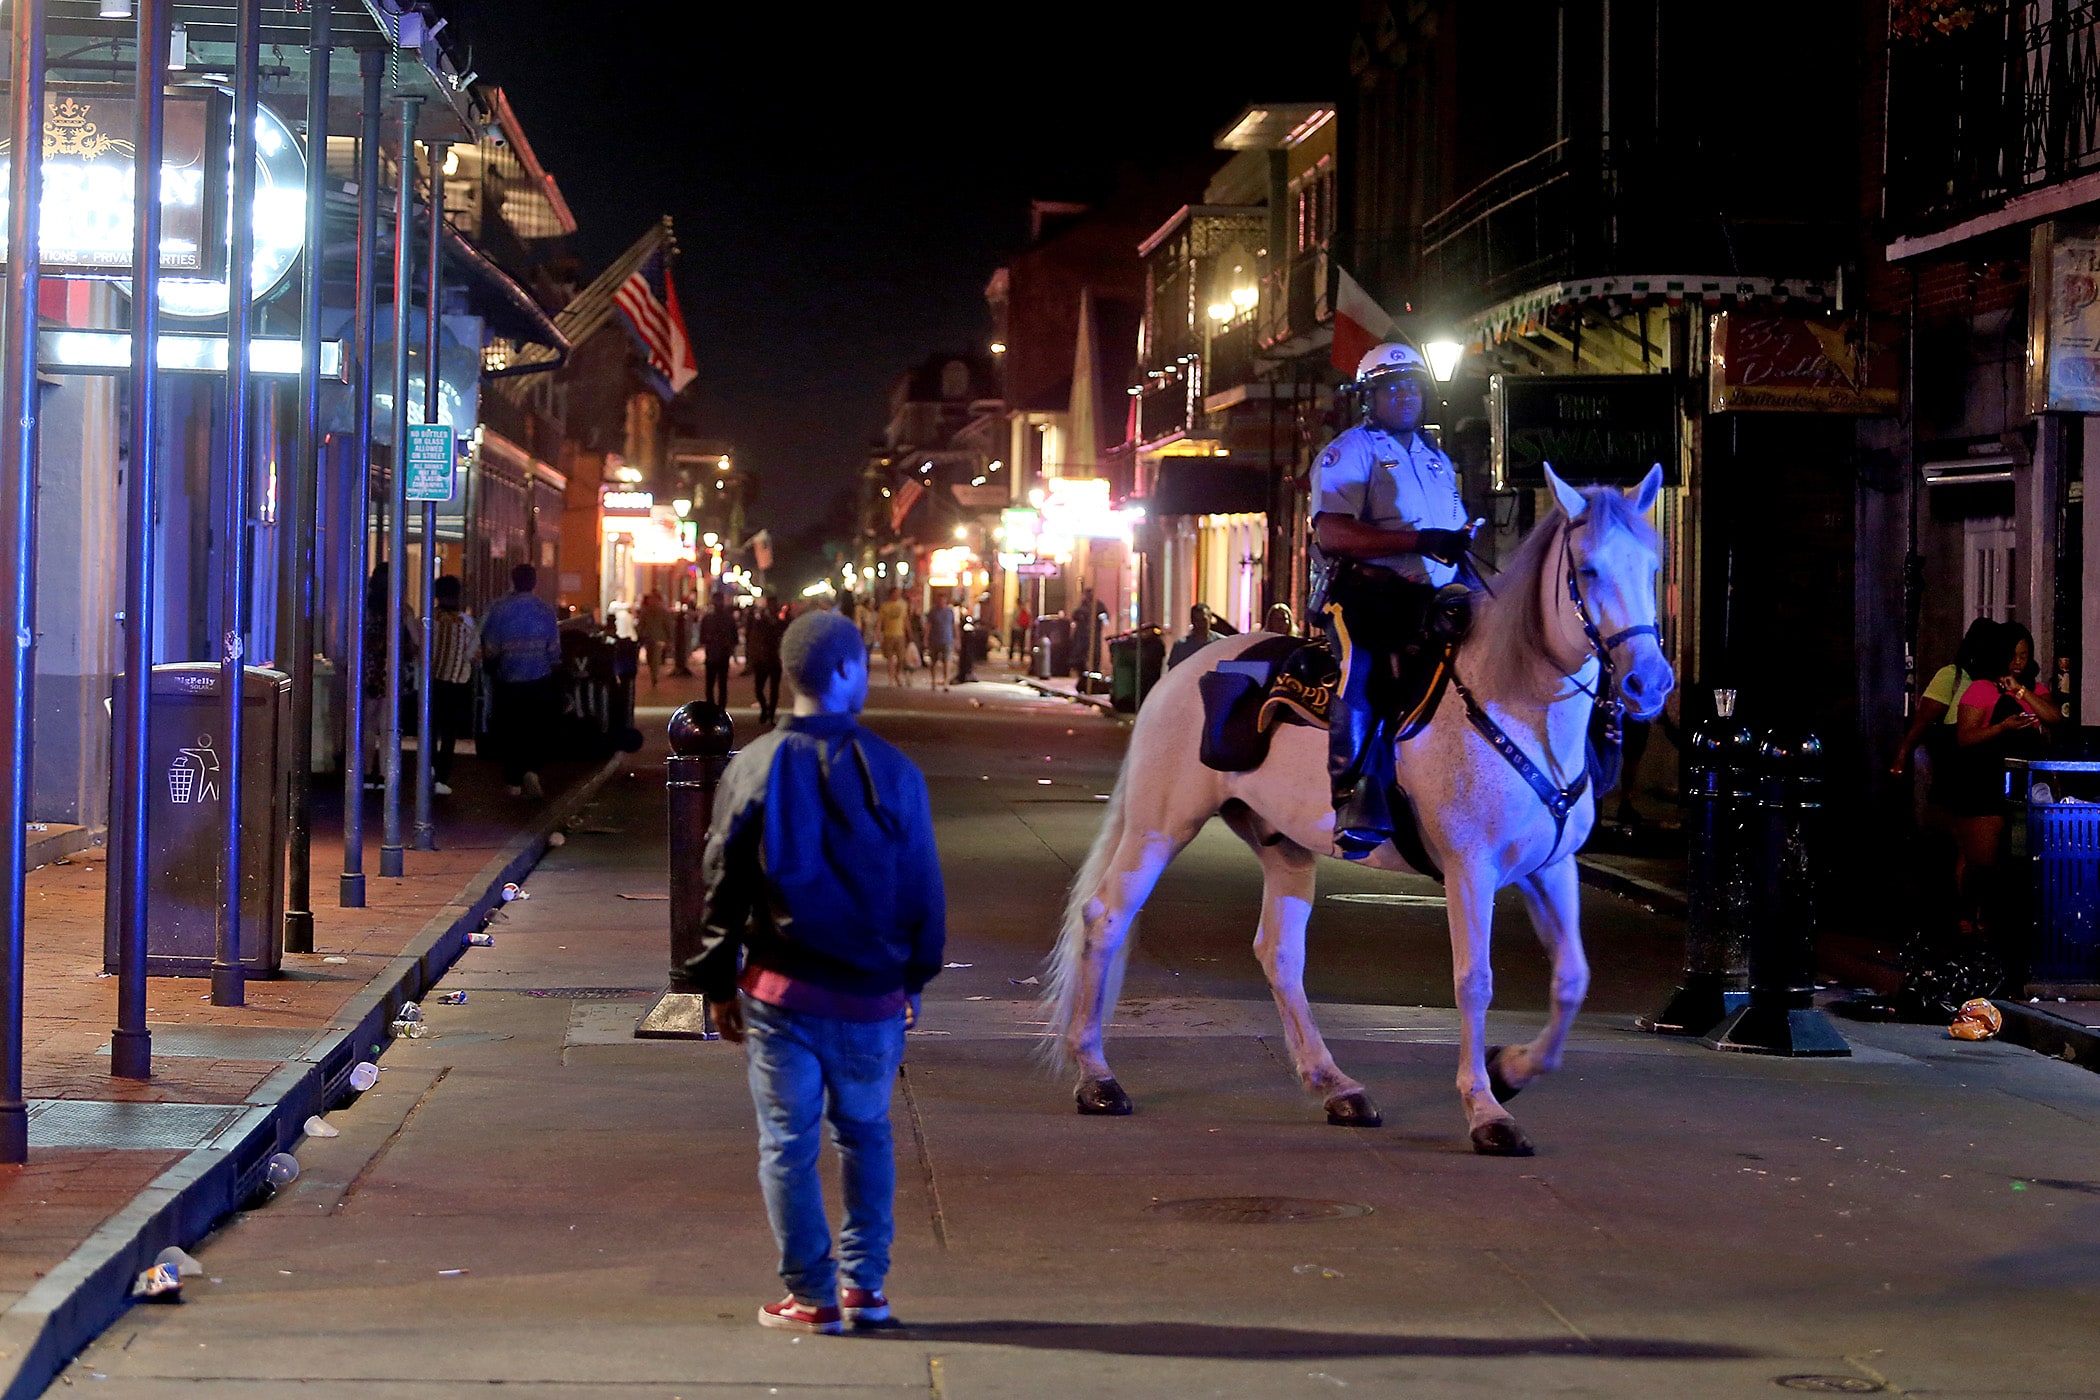 A mounted NOPD officer rides on a nearly empty Bourbon Street at 12:30 a.m. as the city of New Orleans issues new rules about bar and restaurant operations in the city in response to the Covid-19 pandemic on Monday, March 16, 2020.